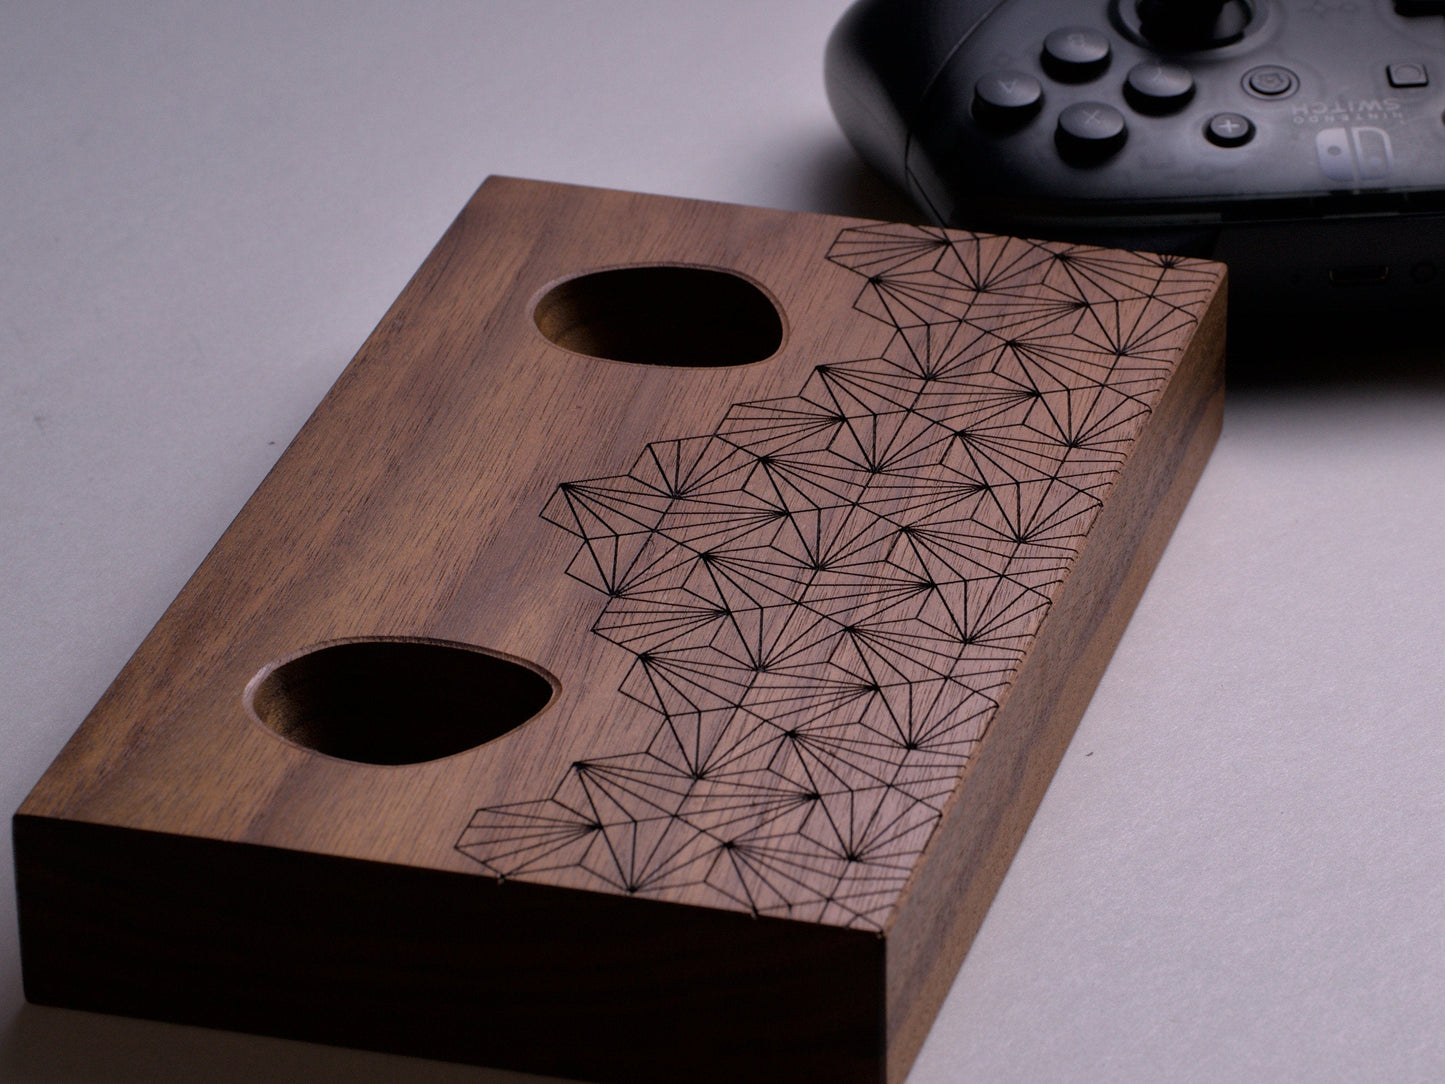 Wooden stand with geometric pattern for Nintendo switch pro controller